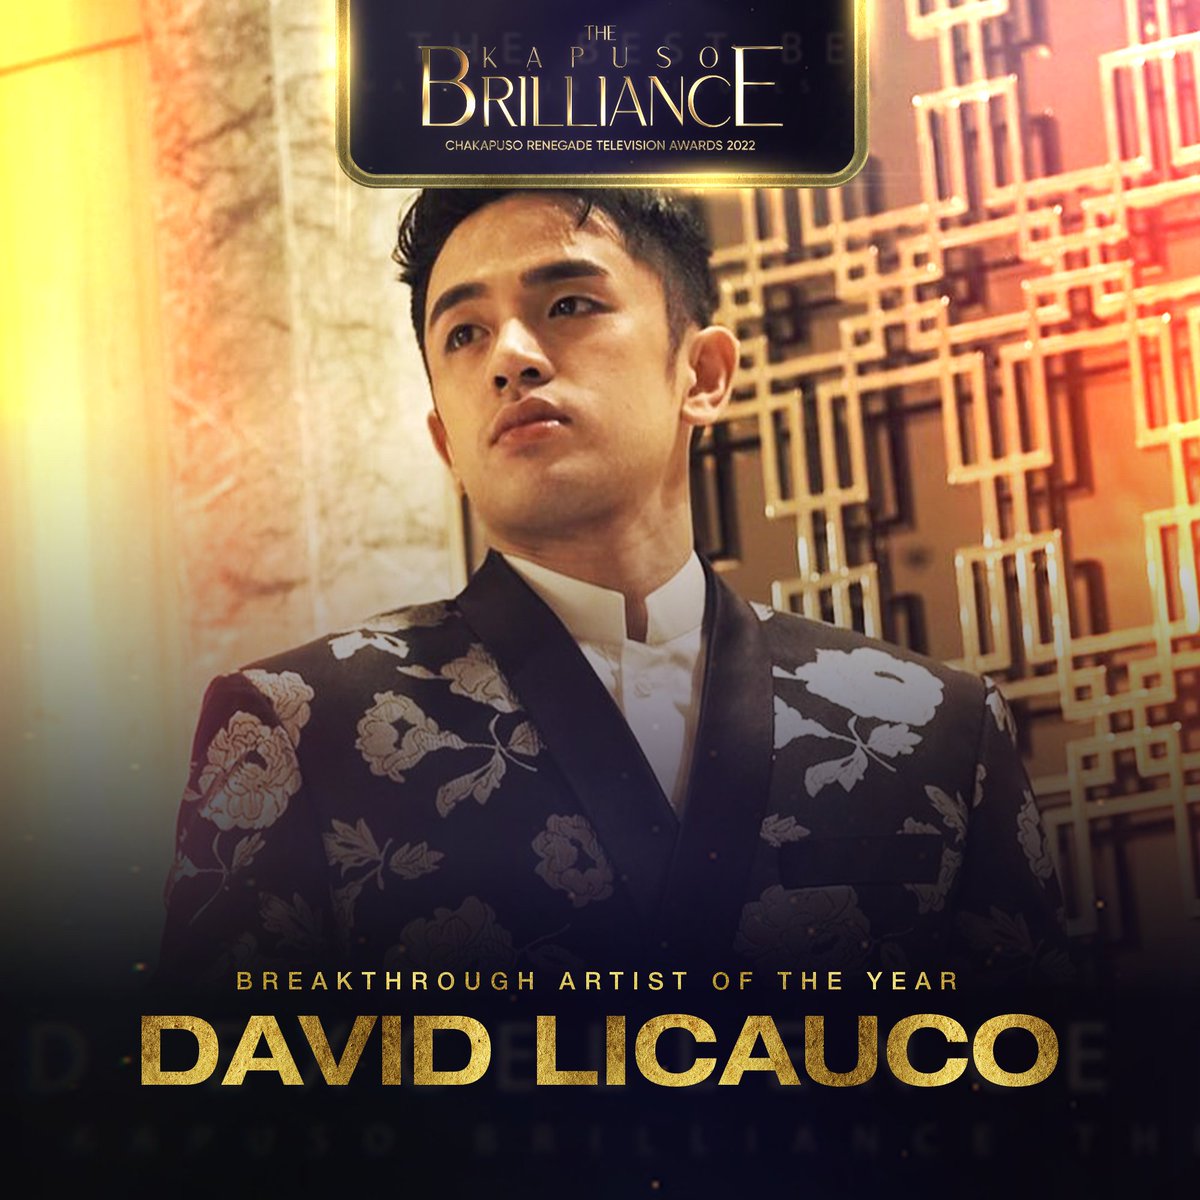 Breakthrough Kapuso Artist of the Year: David Licauco

With his charm and improved acting skills, @davidlicauco indeed paved his way to breakthrough this 2022. The #MariaClaraAtIbarra Star continues to mold his craft and grow his fanbase.

#TheKapusoBrilliance | CKR TVAwards2022